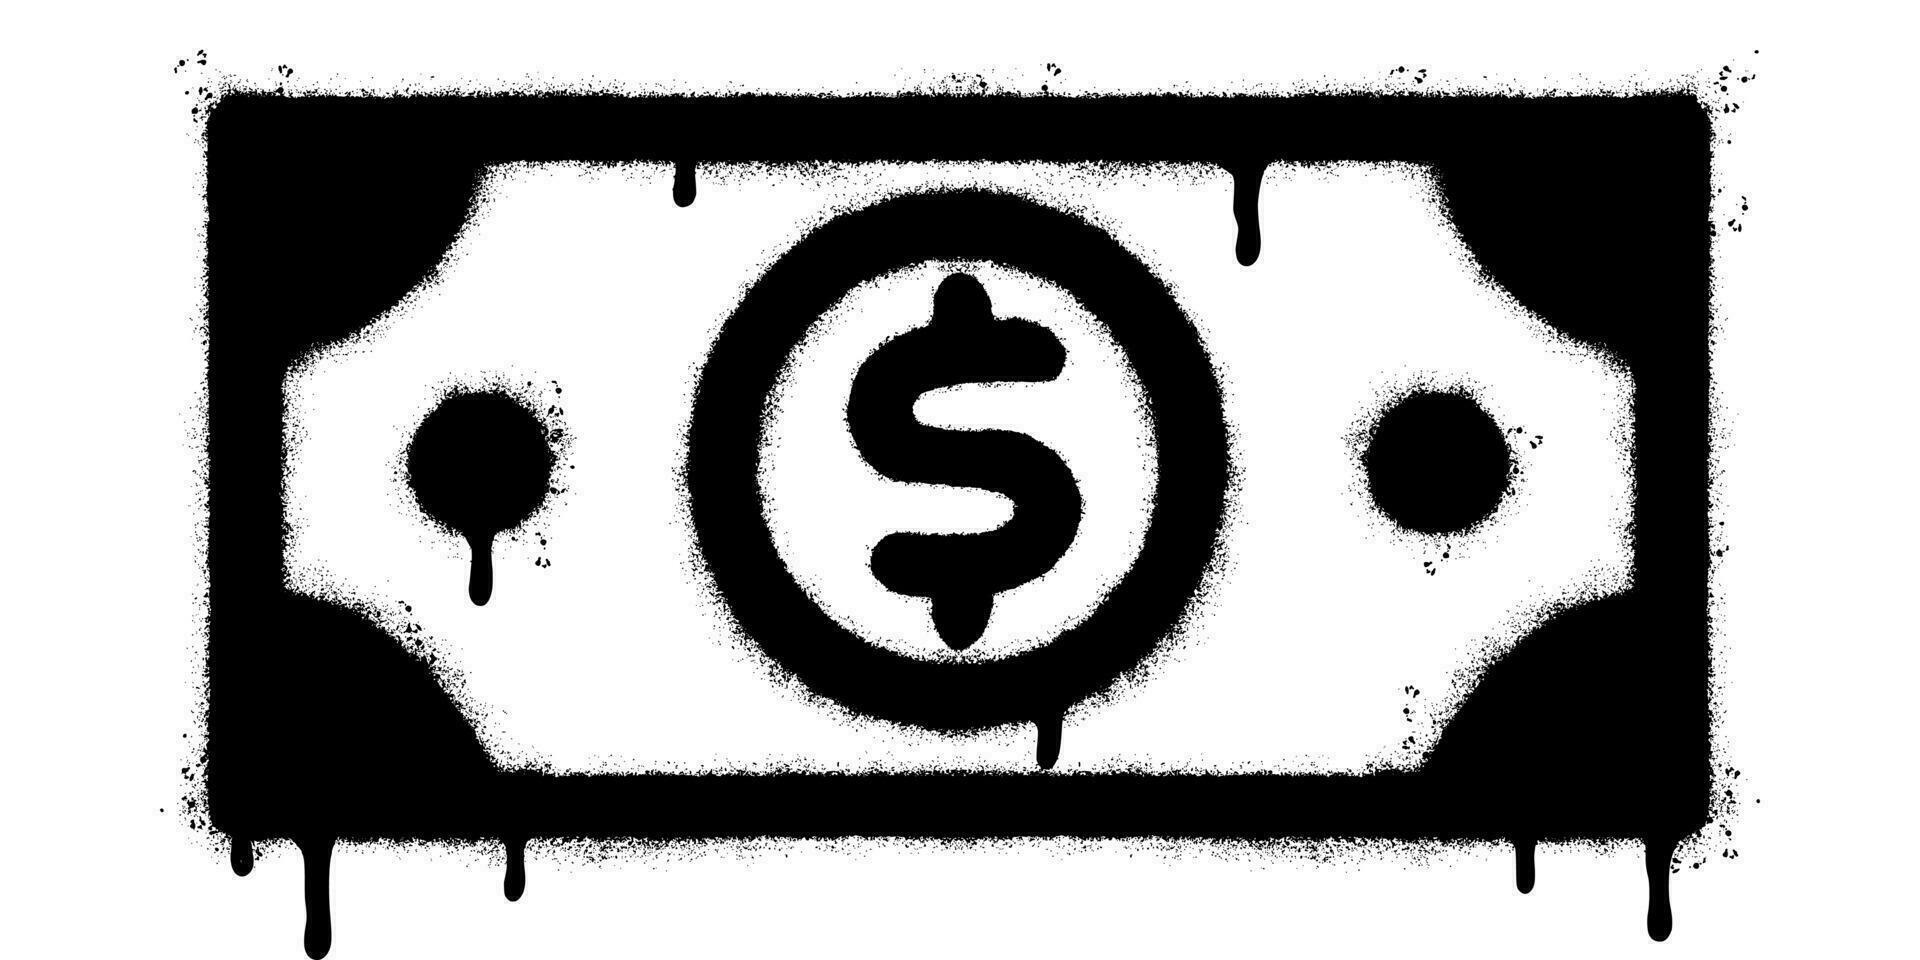 Spray Painted Graffiti dollar Dollar paper money Sprayed isolated with a white background. graffiti cash icon with over spray in black over white. vector